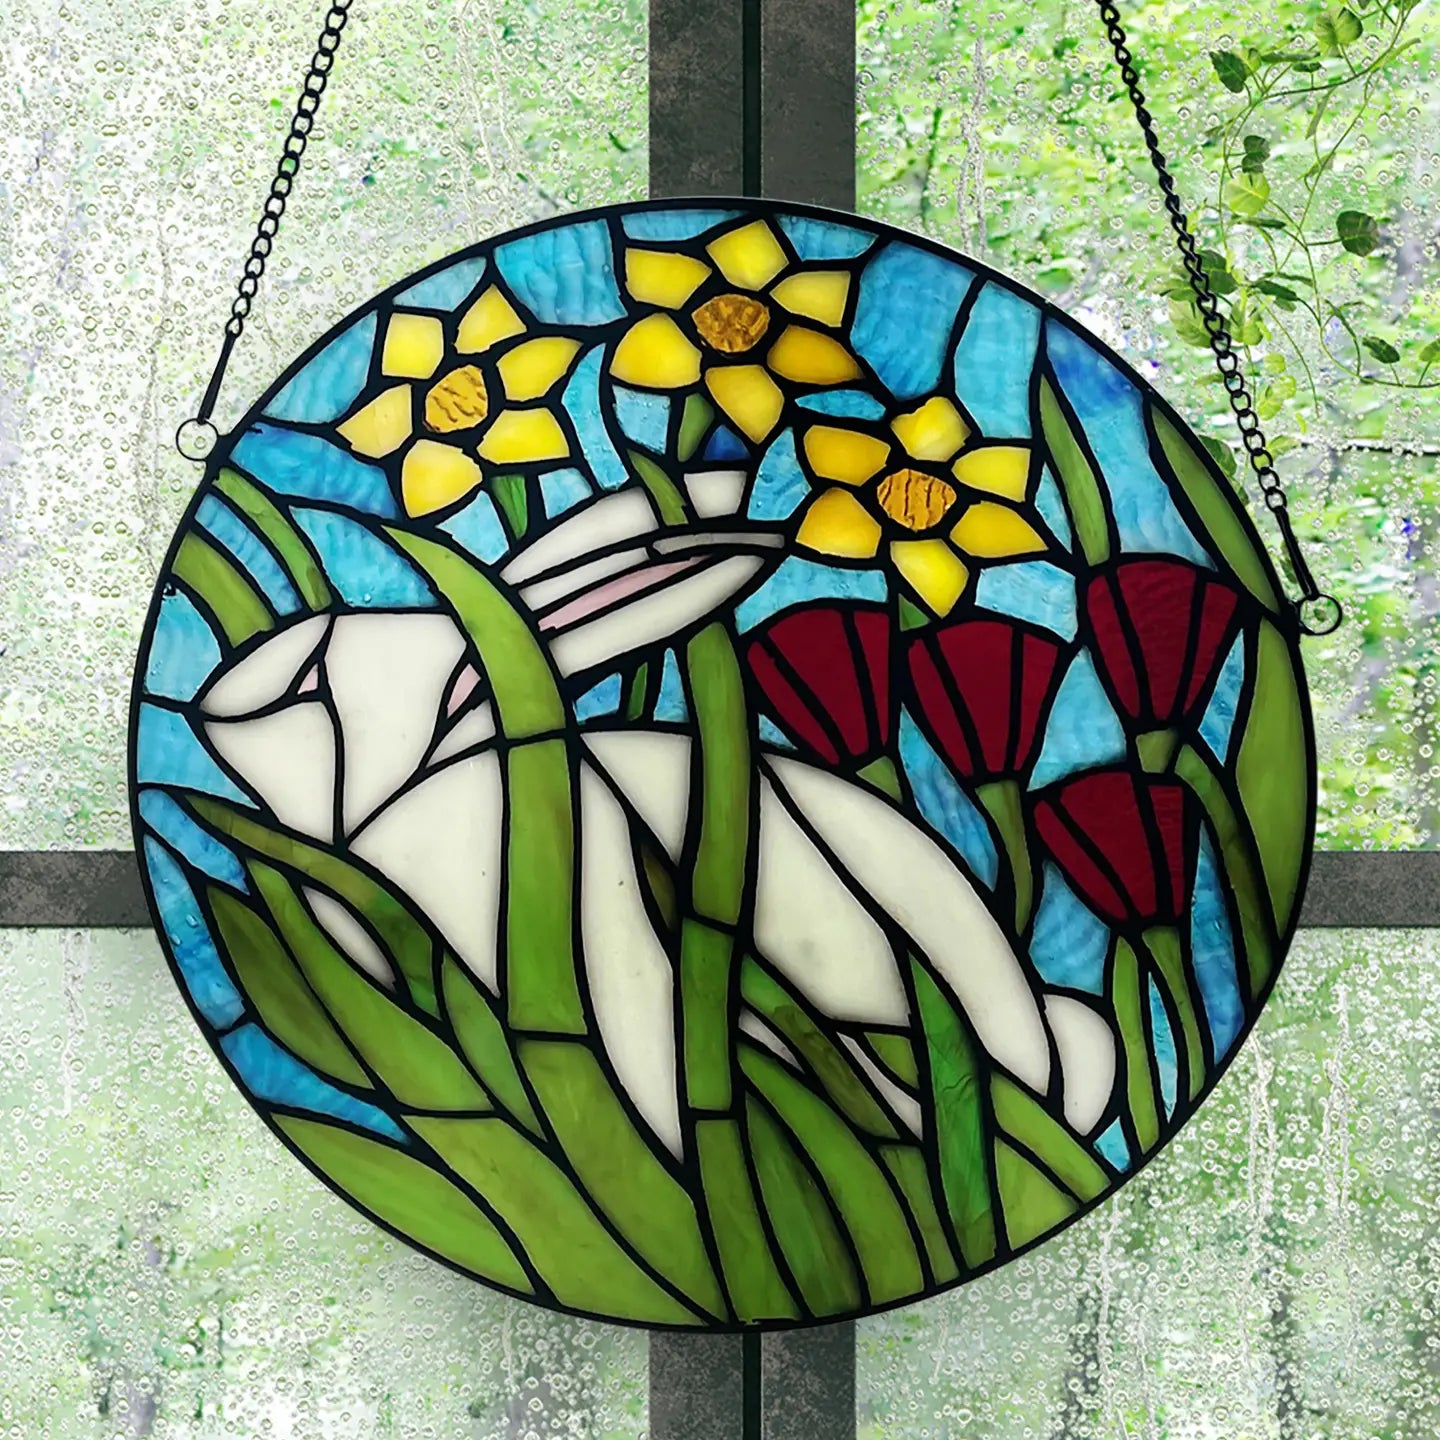 Thumper Bambi bunny Sunflower Stained Glass Window Panel-Every Girl Loves Sparkles